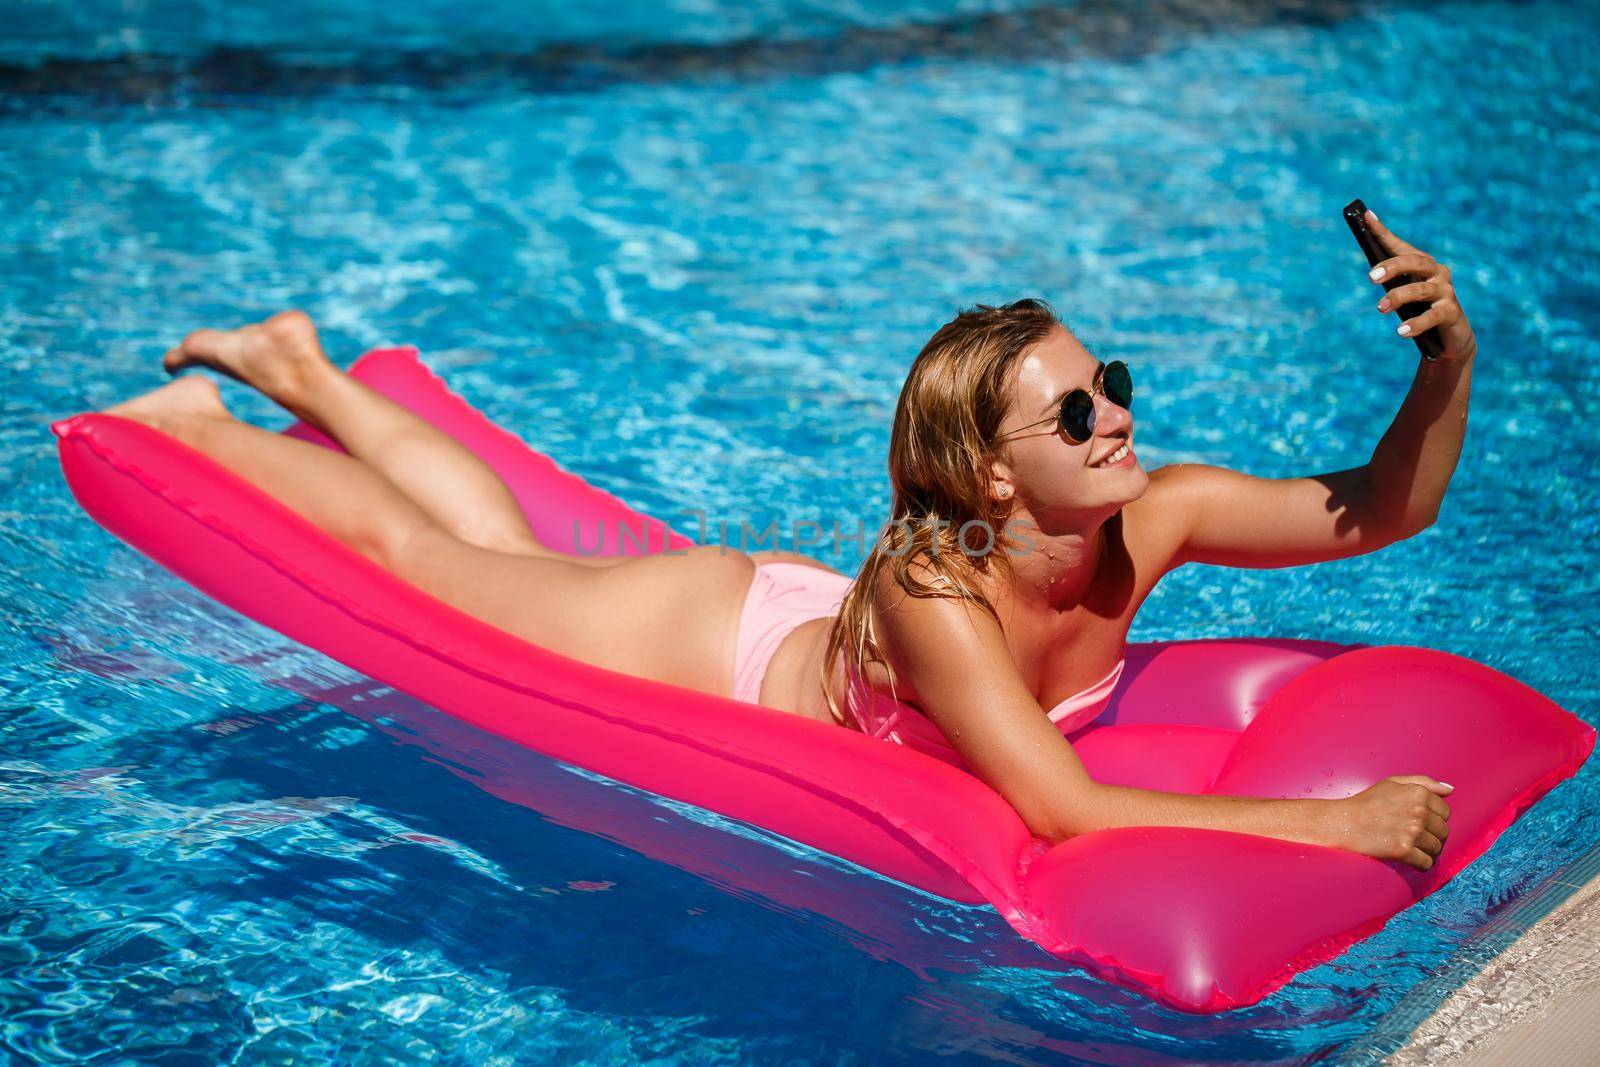 Sexy woman with a phone in a swimsuit lies on a pink inflatable mattress in the pool. Relax by the pool on a hot summer sunny day. Vacation concept